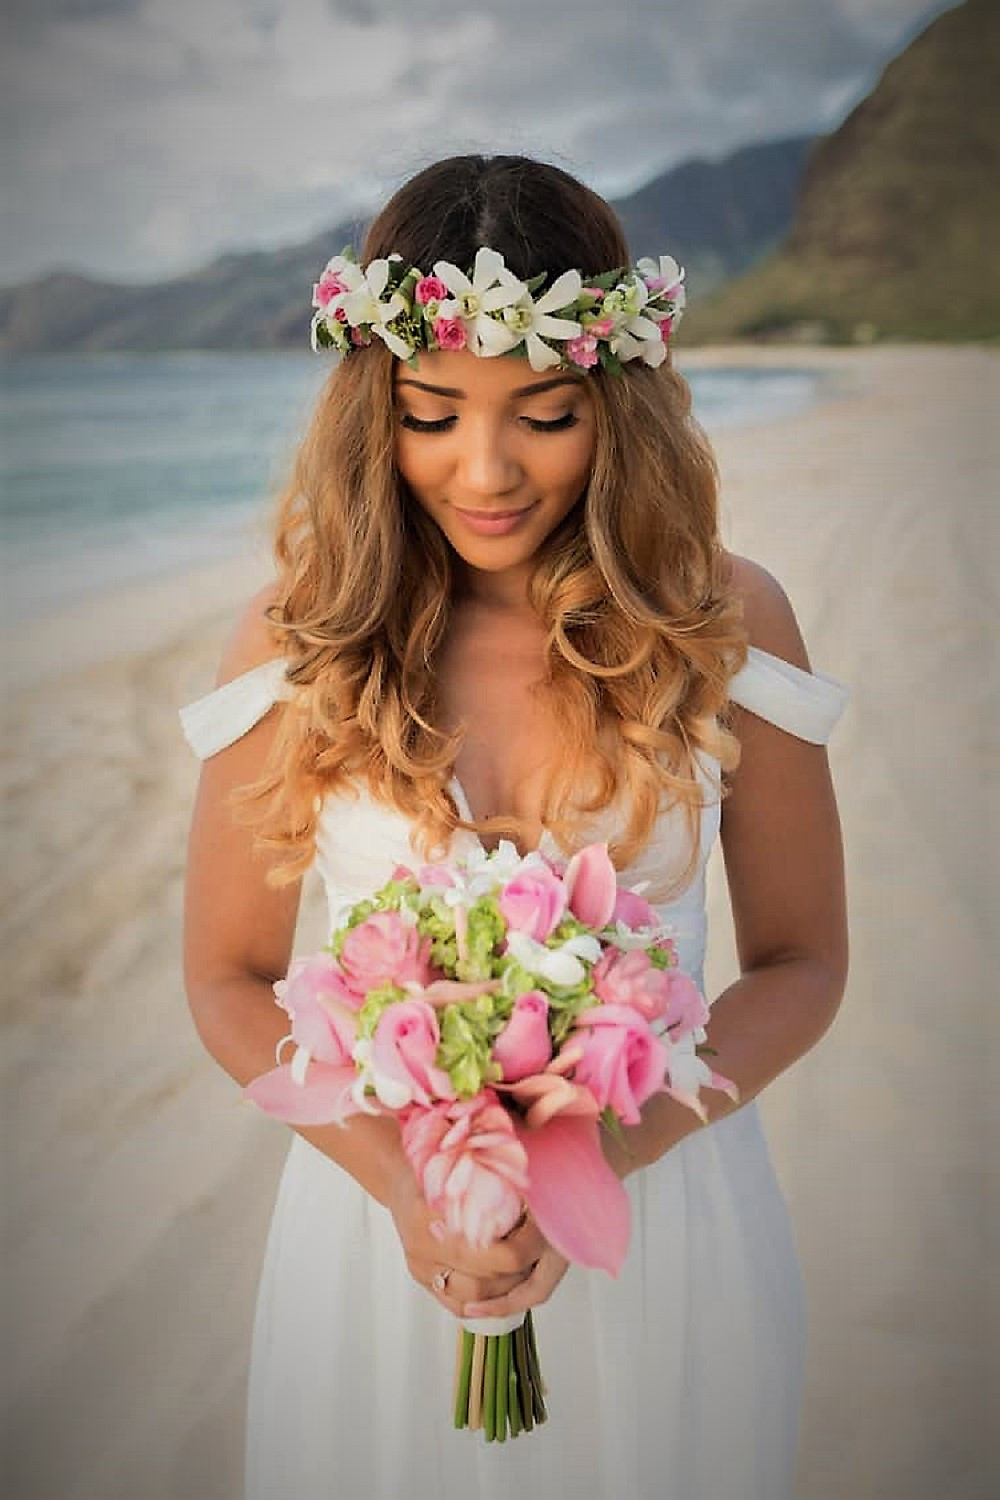 Beach Wedding Hair
 Beach Wedding Hairstyle Should Withstand the Wind